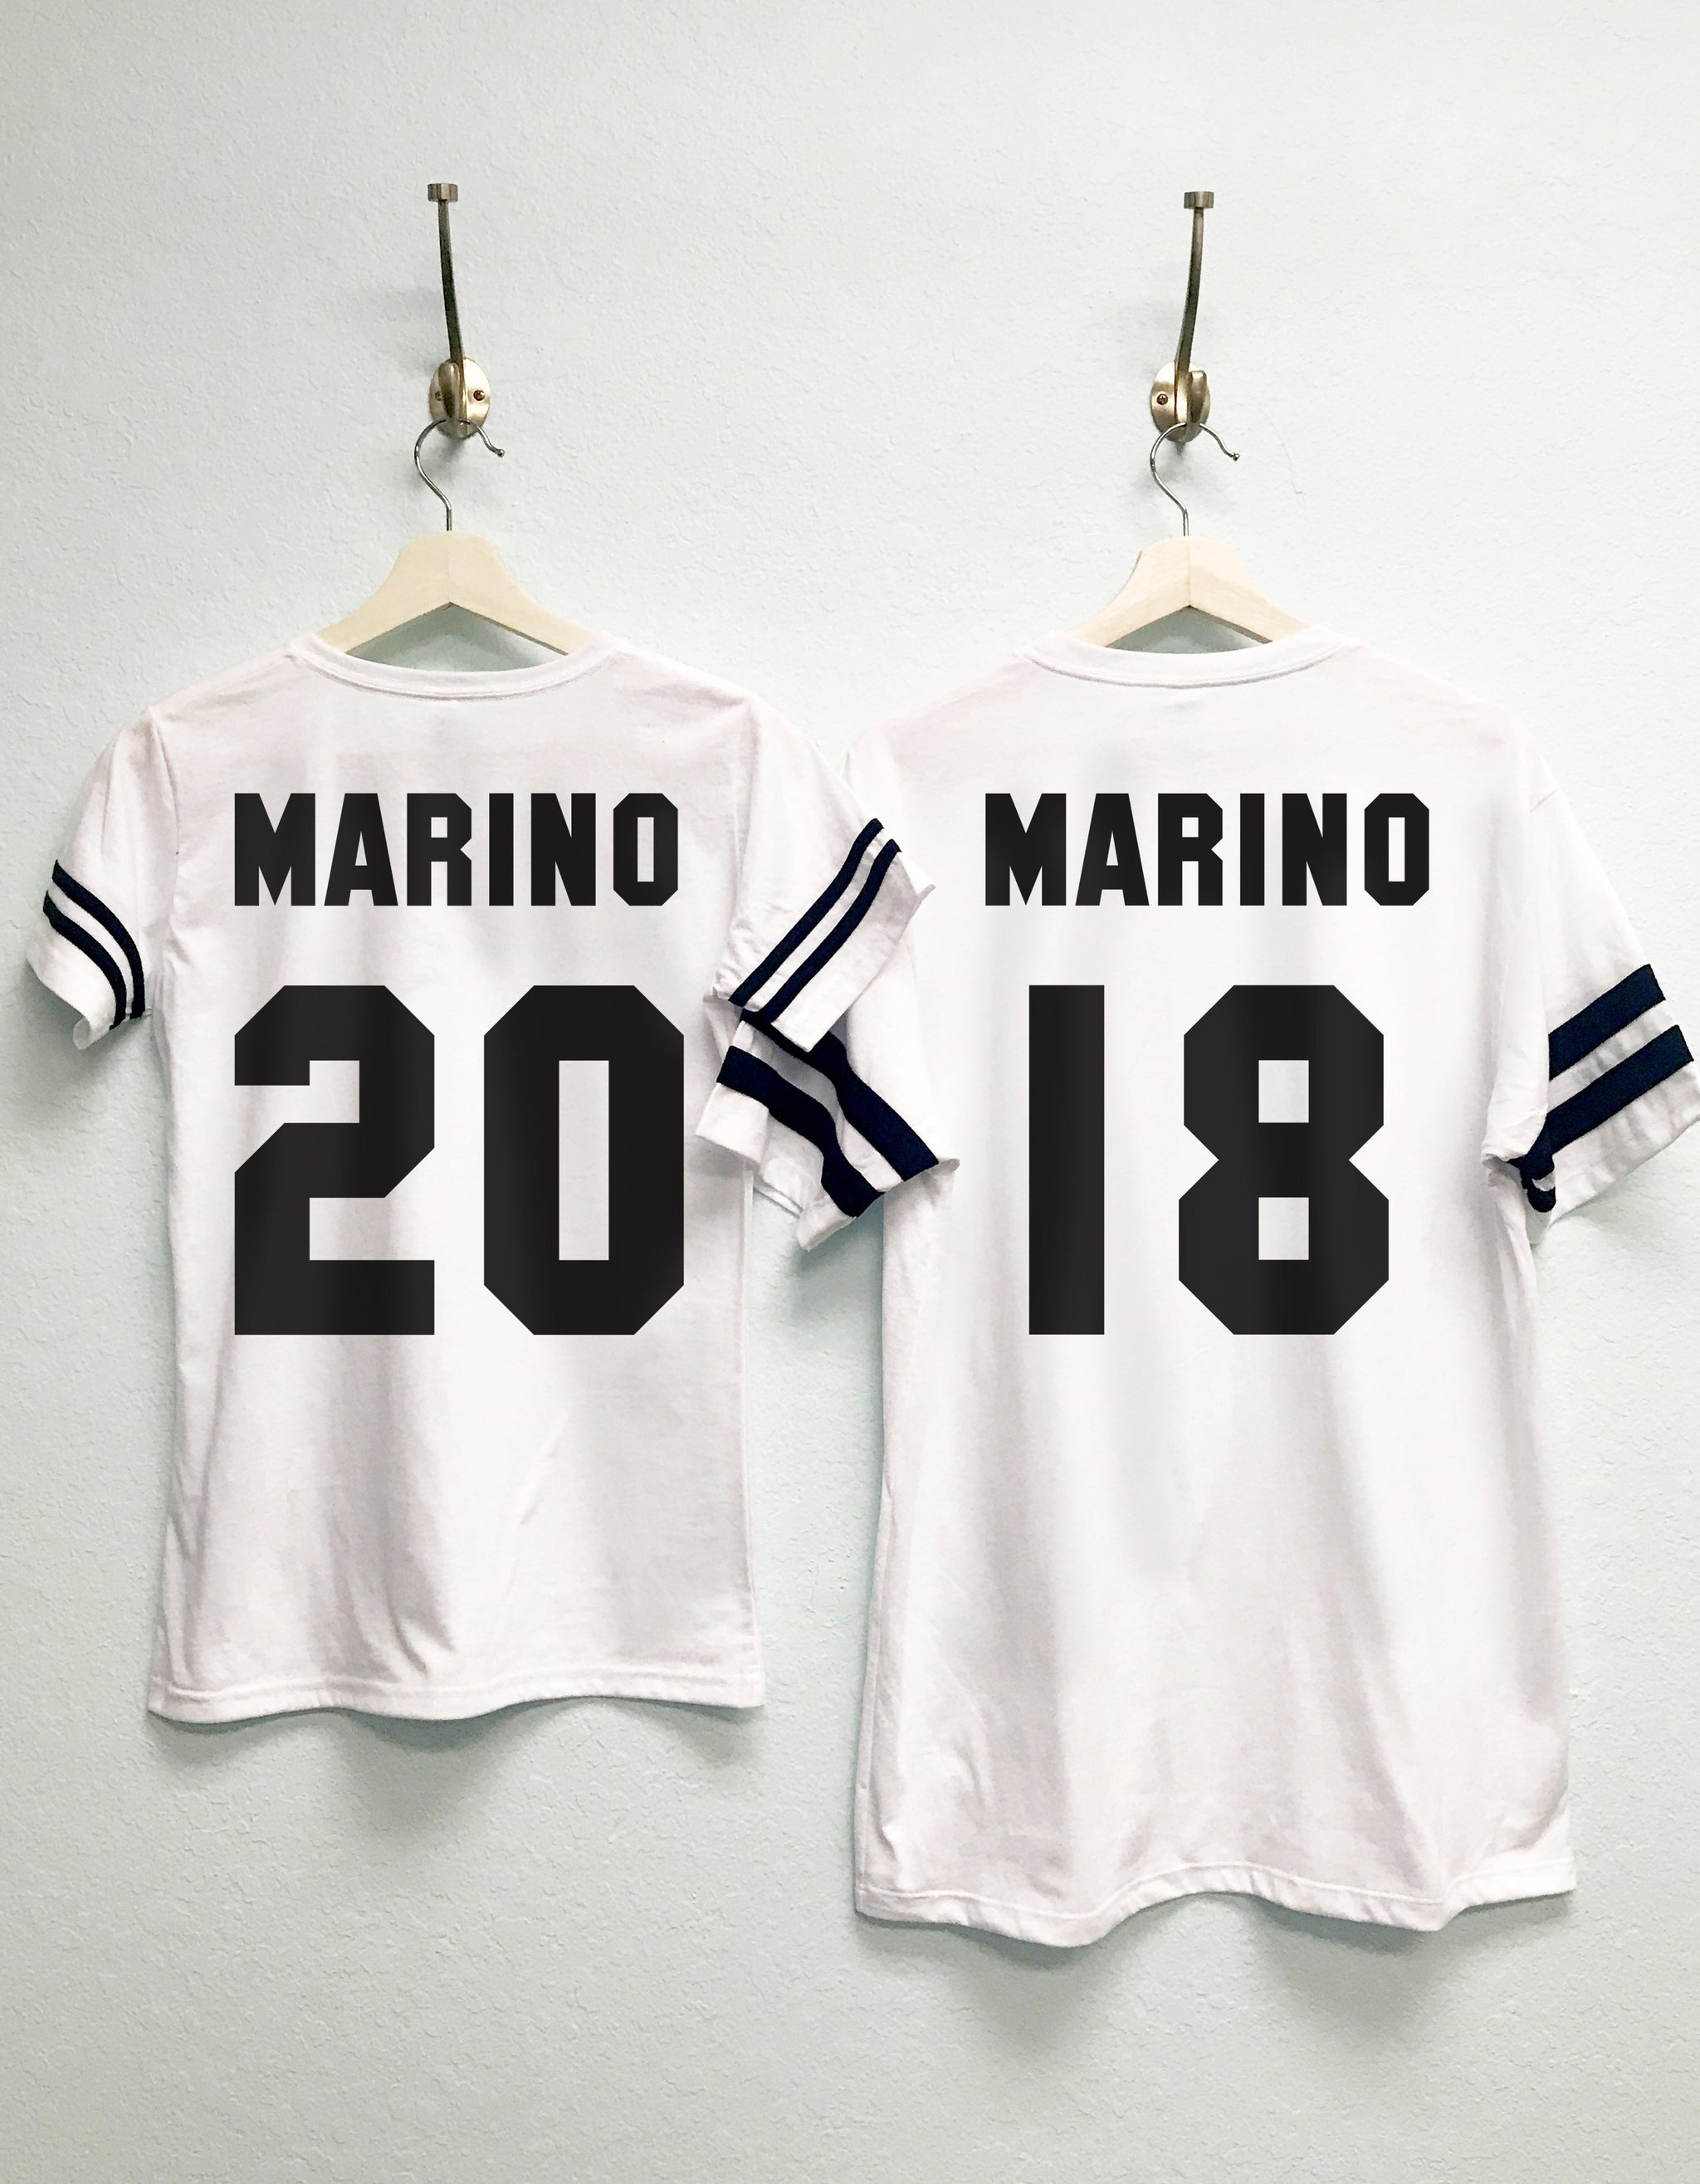 Hubby & Wifey Shirts With Custom Names + Numbers Set